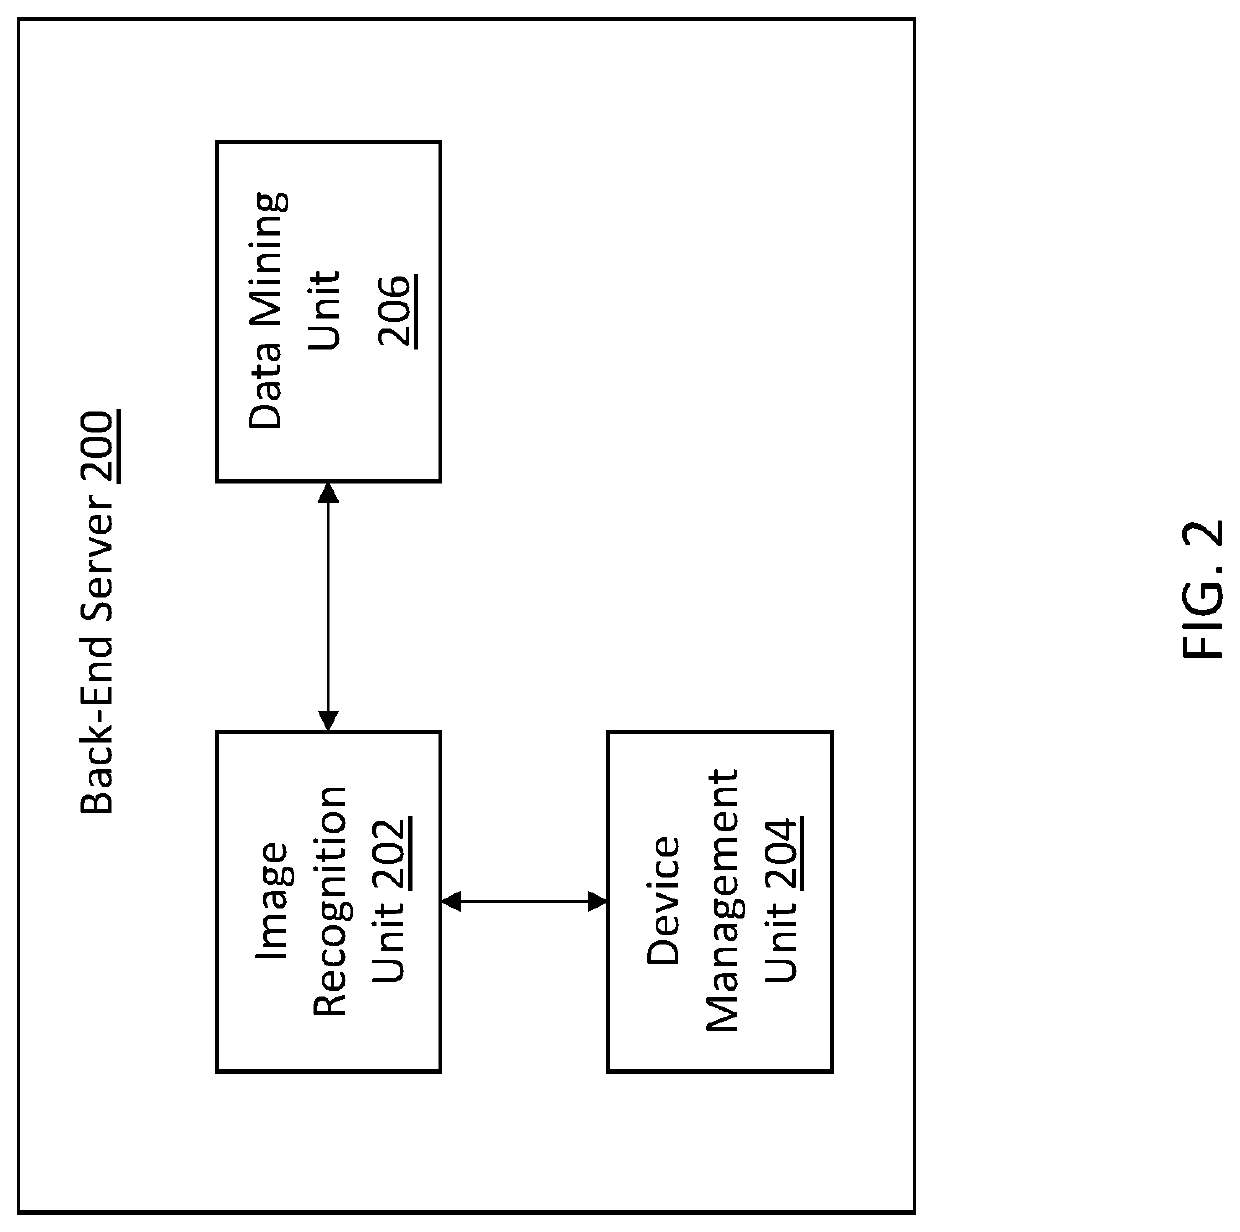 Methods and apparatus for managing telecommunication system devices